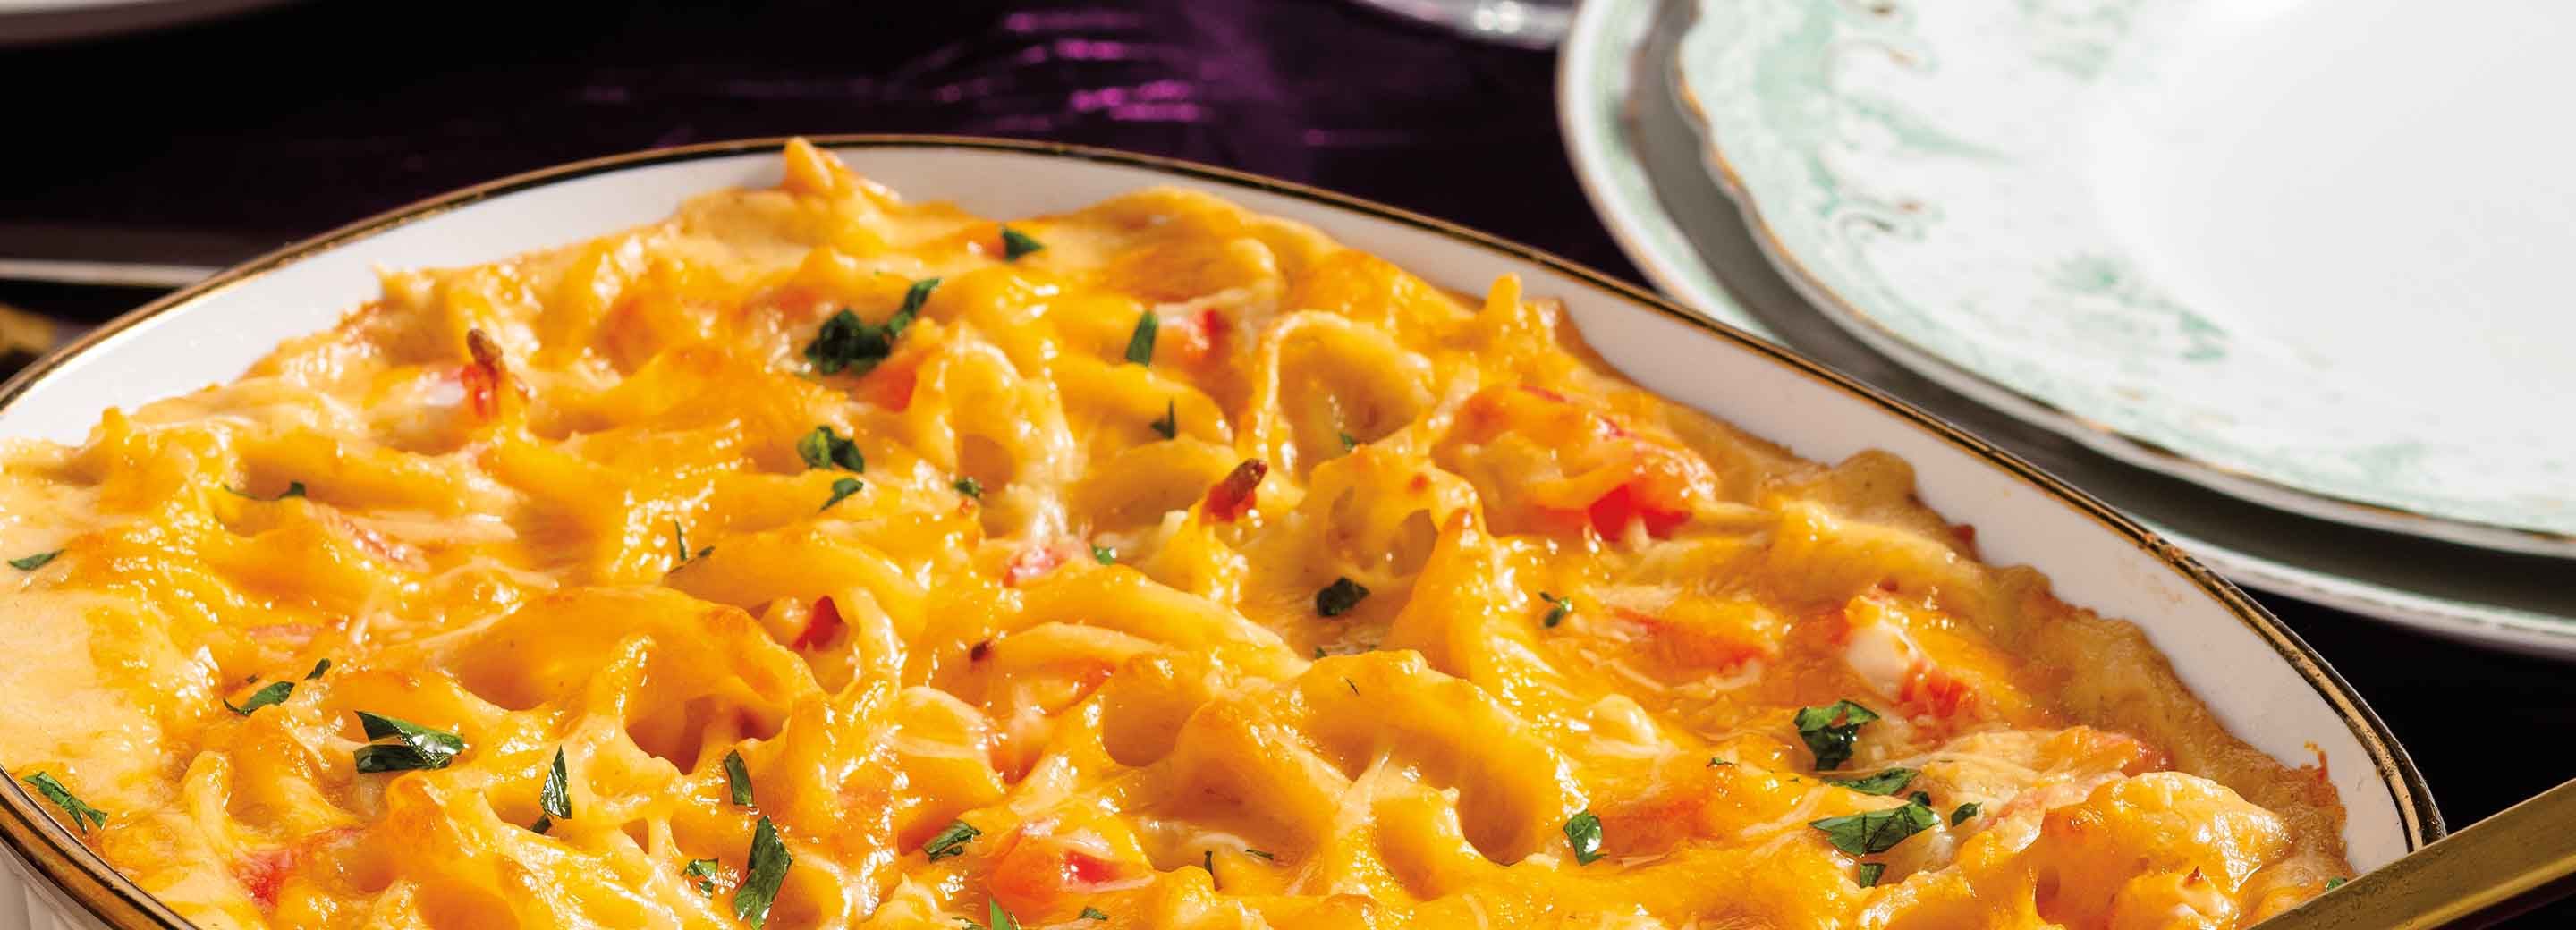 New Orleans-Style Mac & Cheese with Lobster